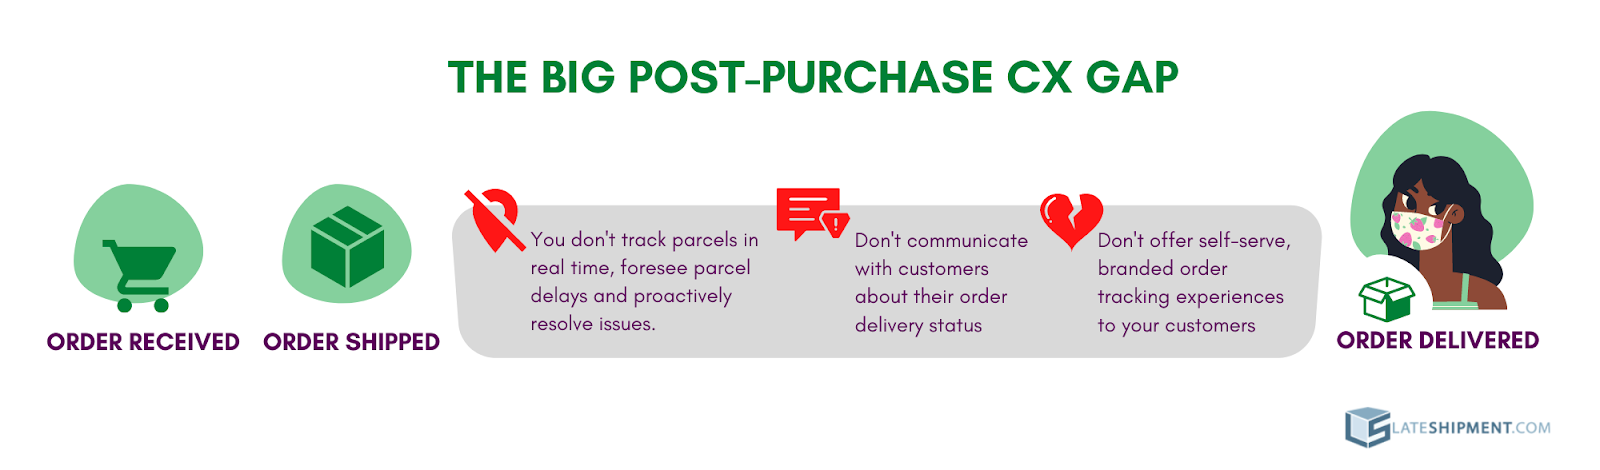 6 Ways to Improve a Customer’s Post-Purchase Delivery Experience ...